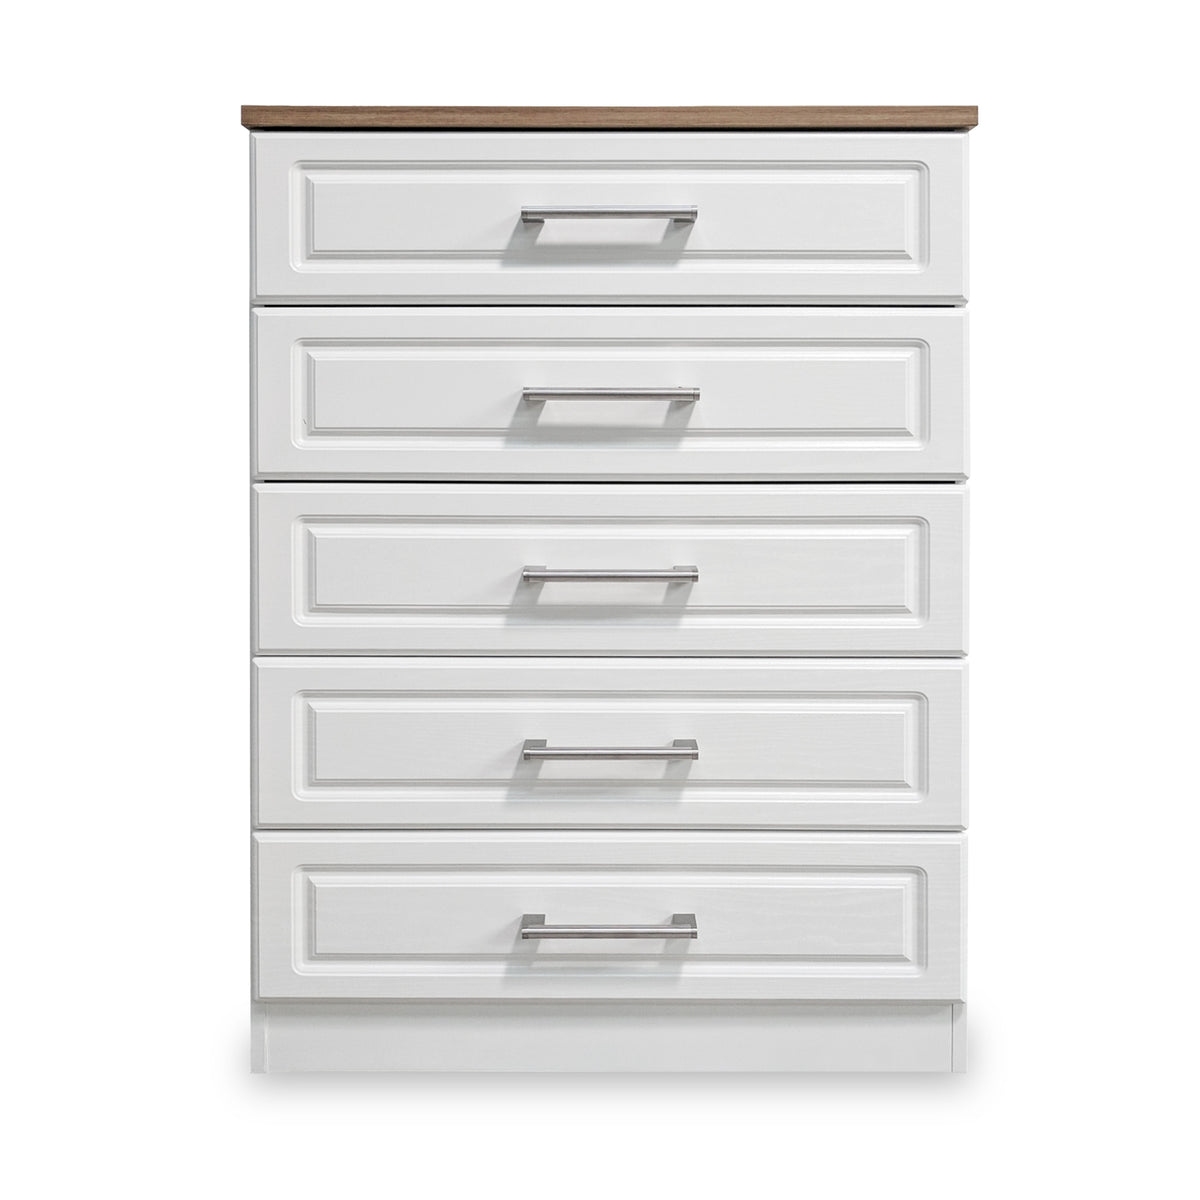 Talland White 5 Drawer Chest by Roseland Furniture